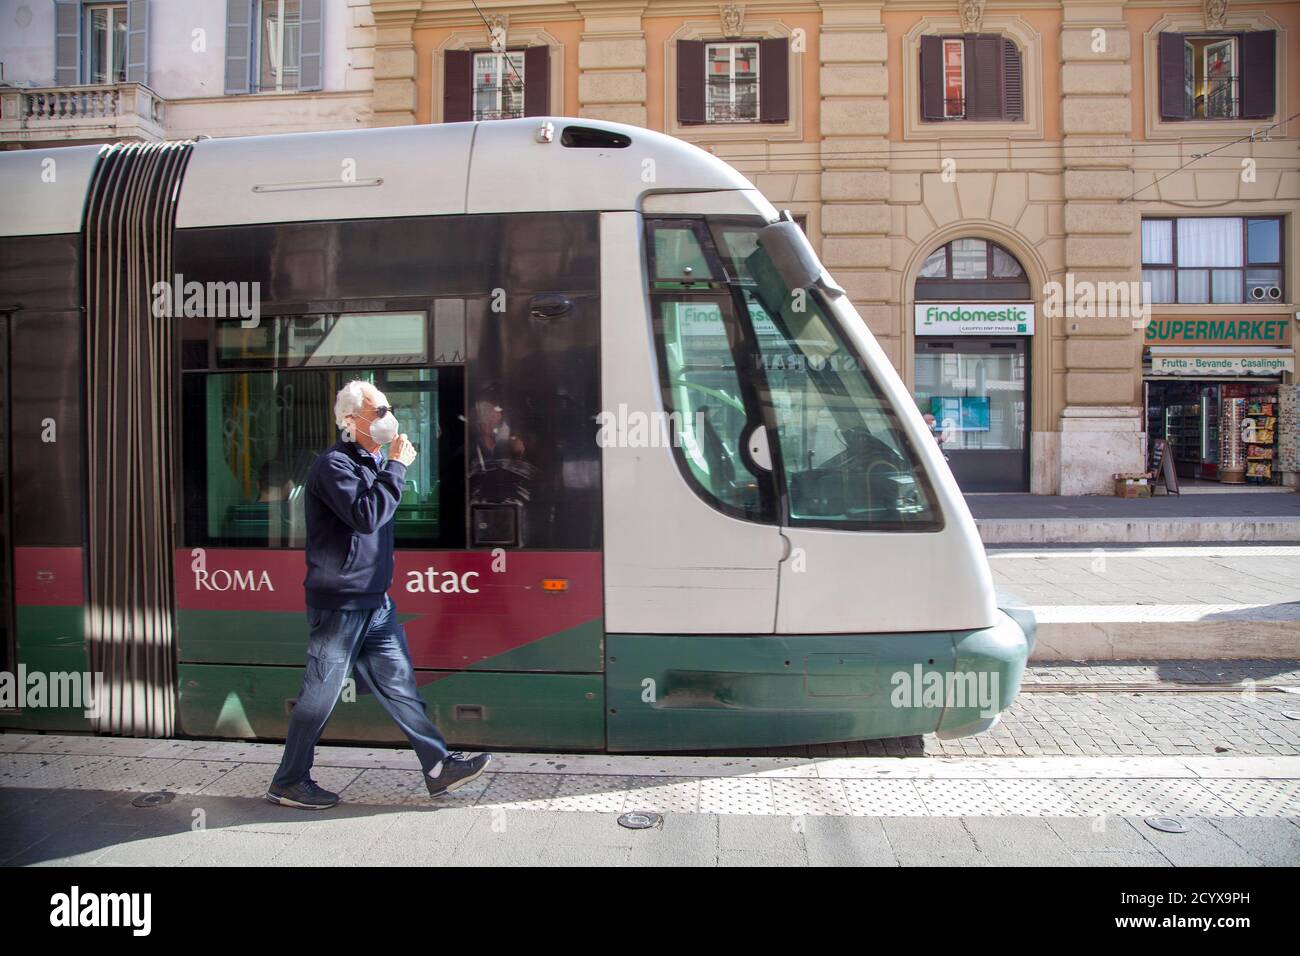 ROME, ITALY - OCTOBER 01 2020: Pedestrians, wearing protective face masks, disembark from a tram in Rome, Italy. Stock Photo